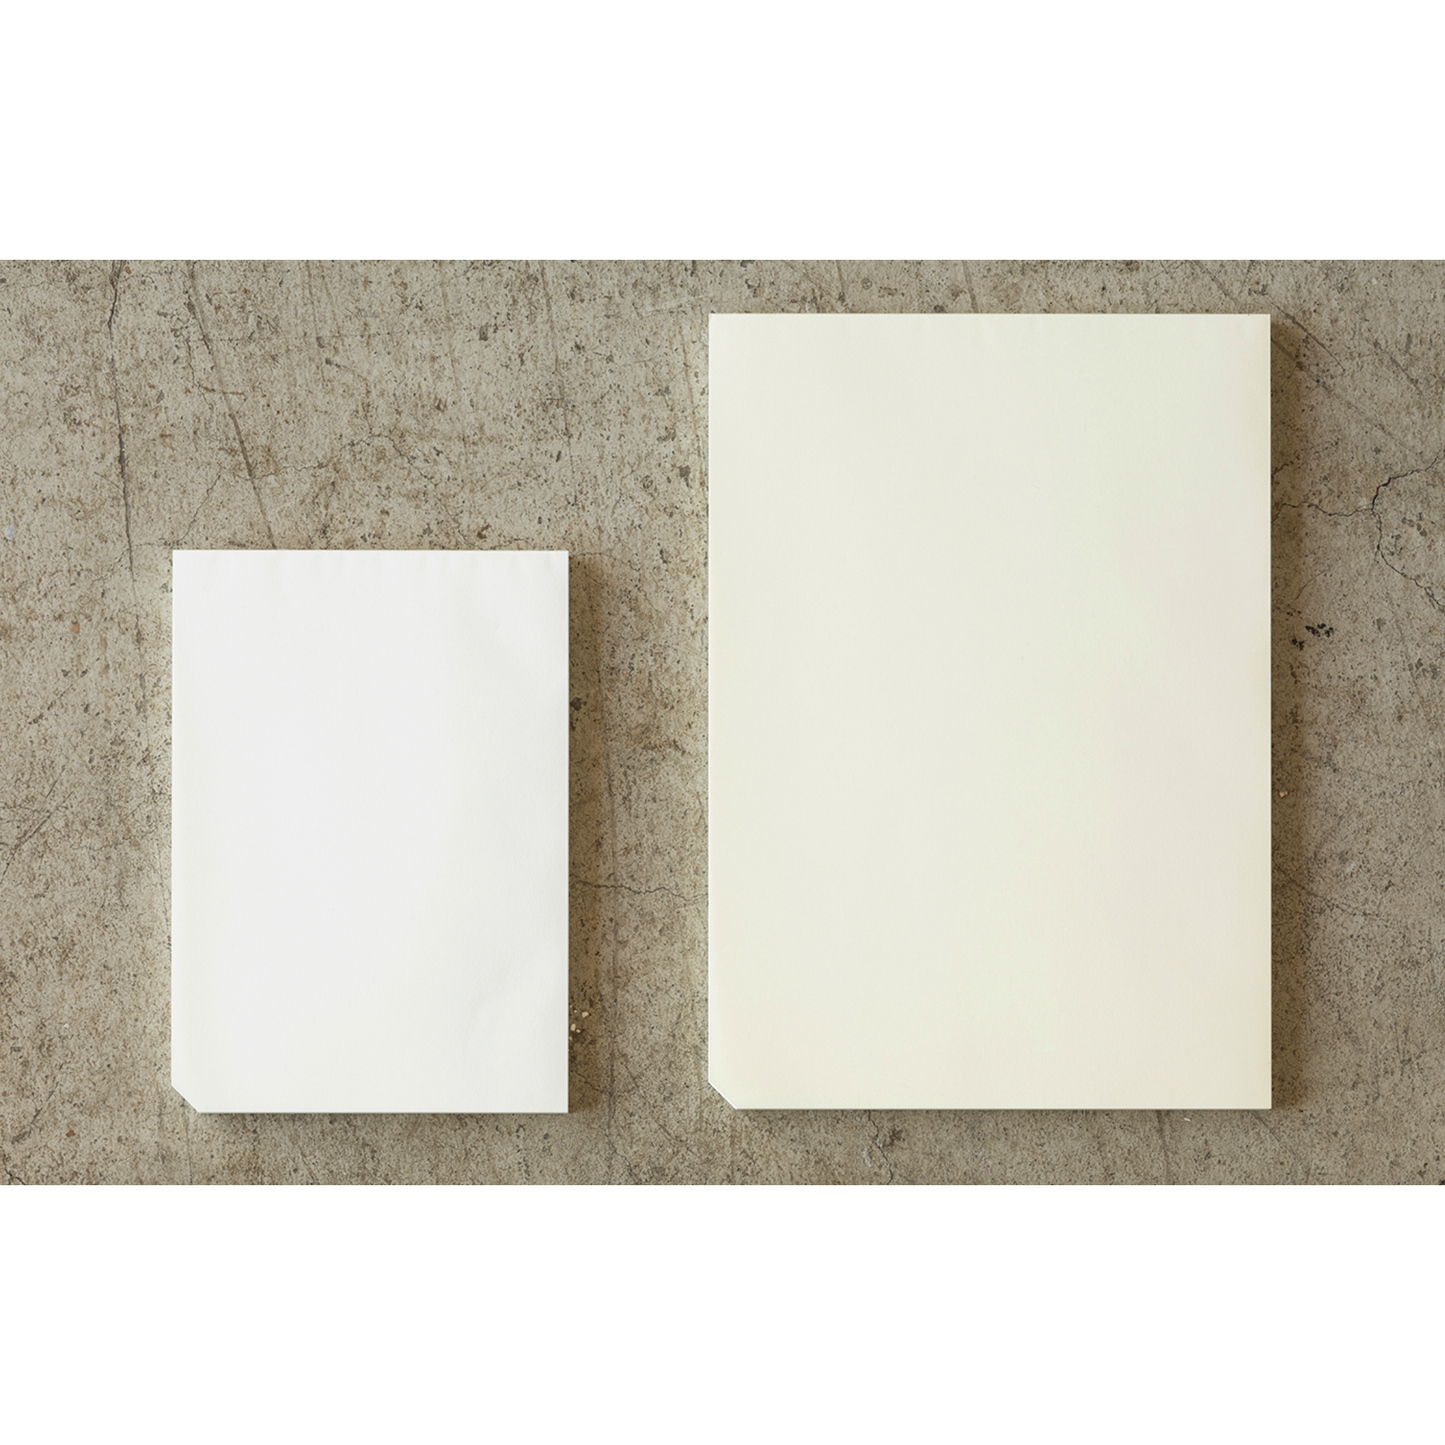 A5 Blank MD Paper Pad